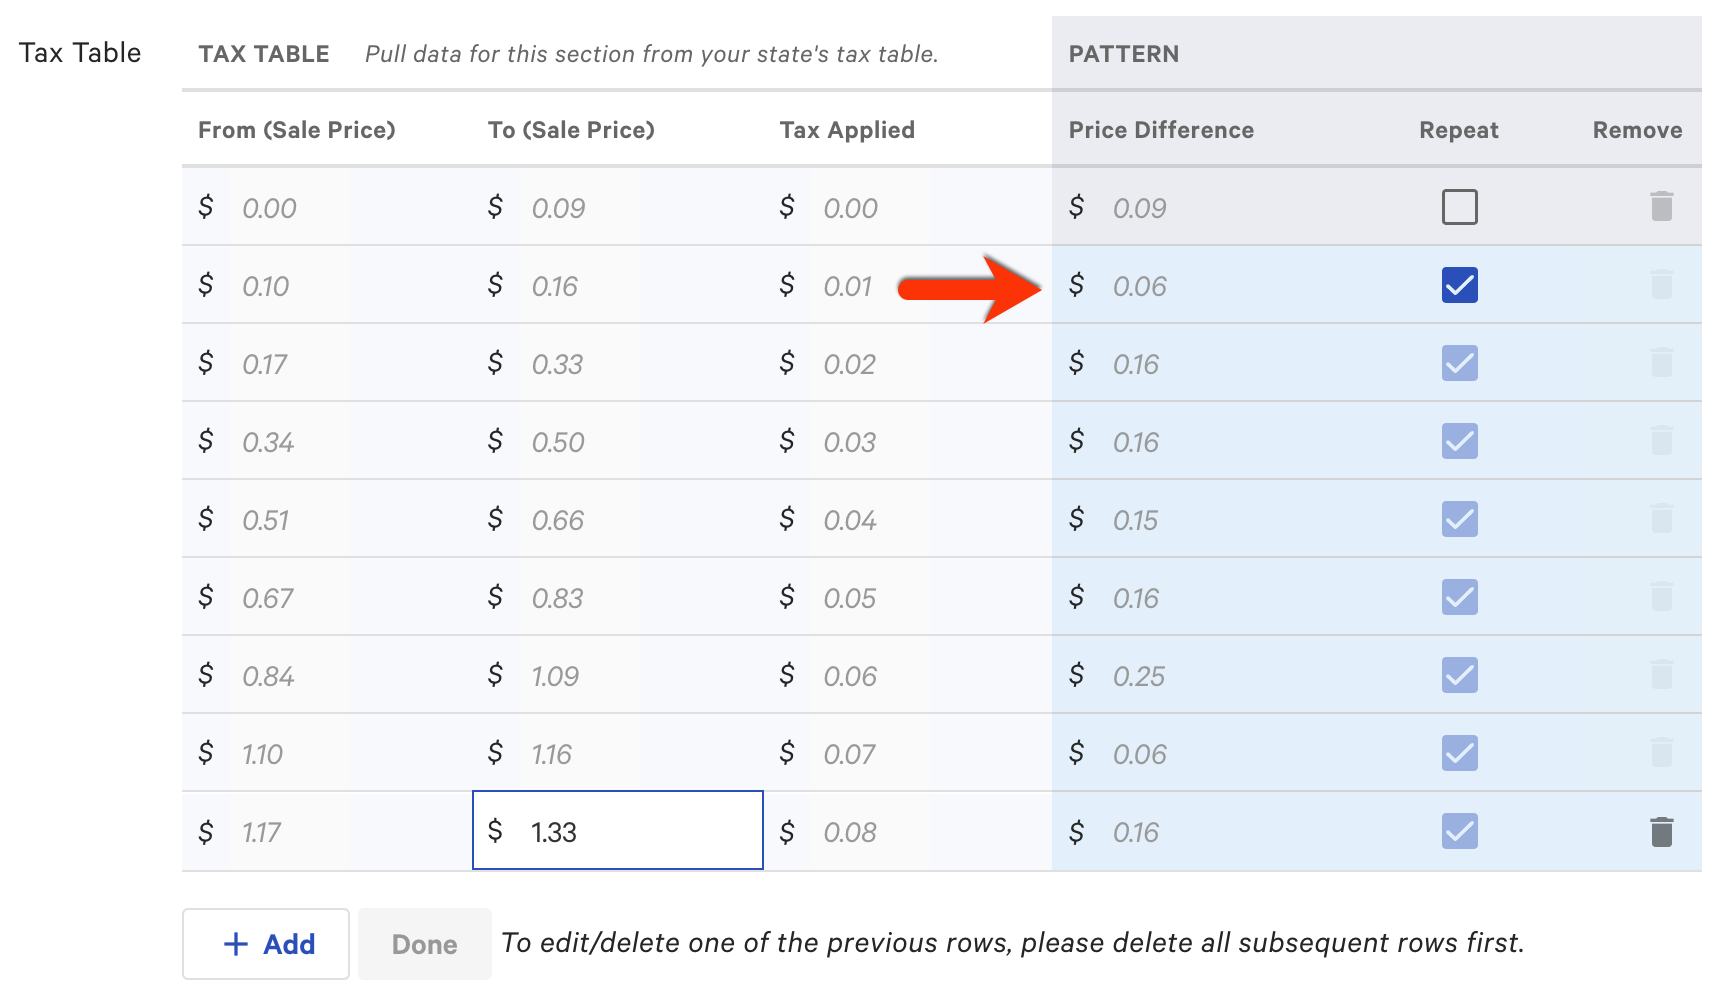 Finding the tax pattern when building the Tax Table in the New tax rate page.